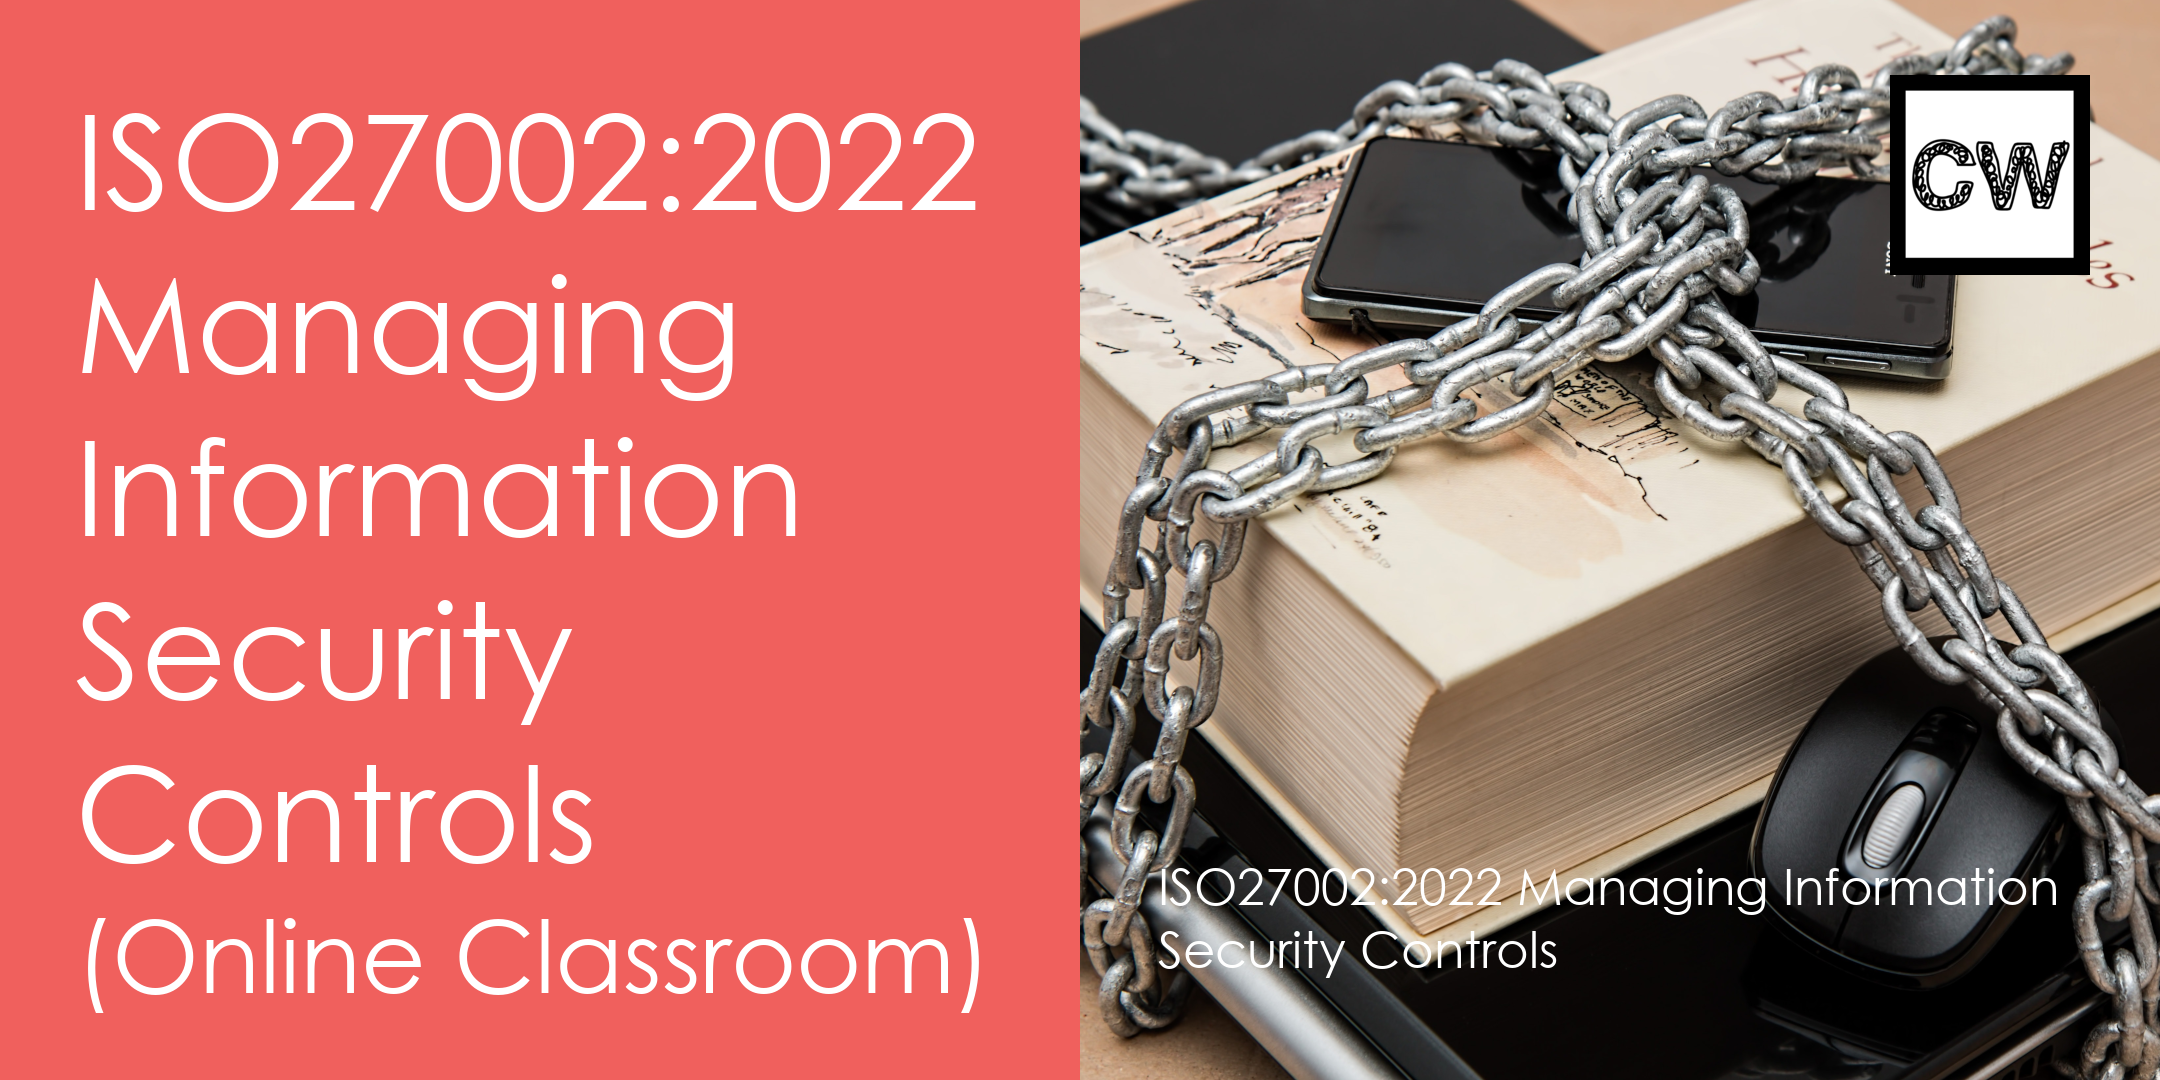 ISO 27002:2022 Managing Information Security Controls